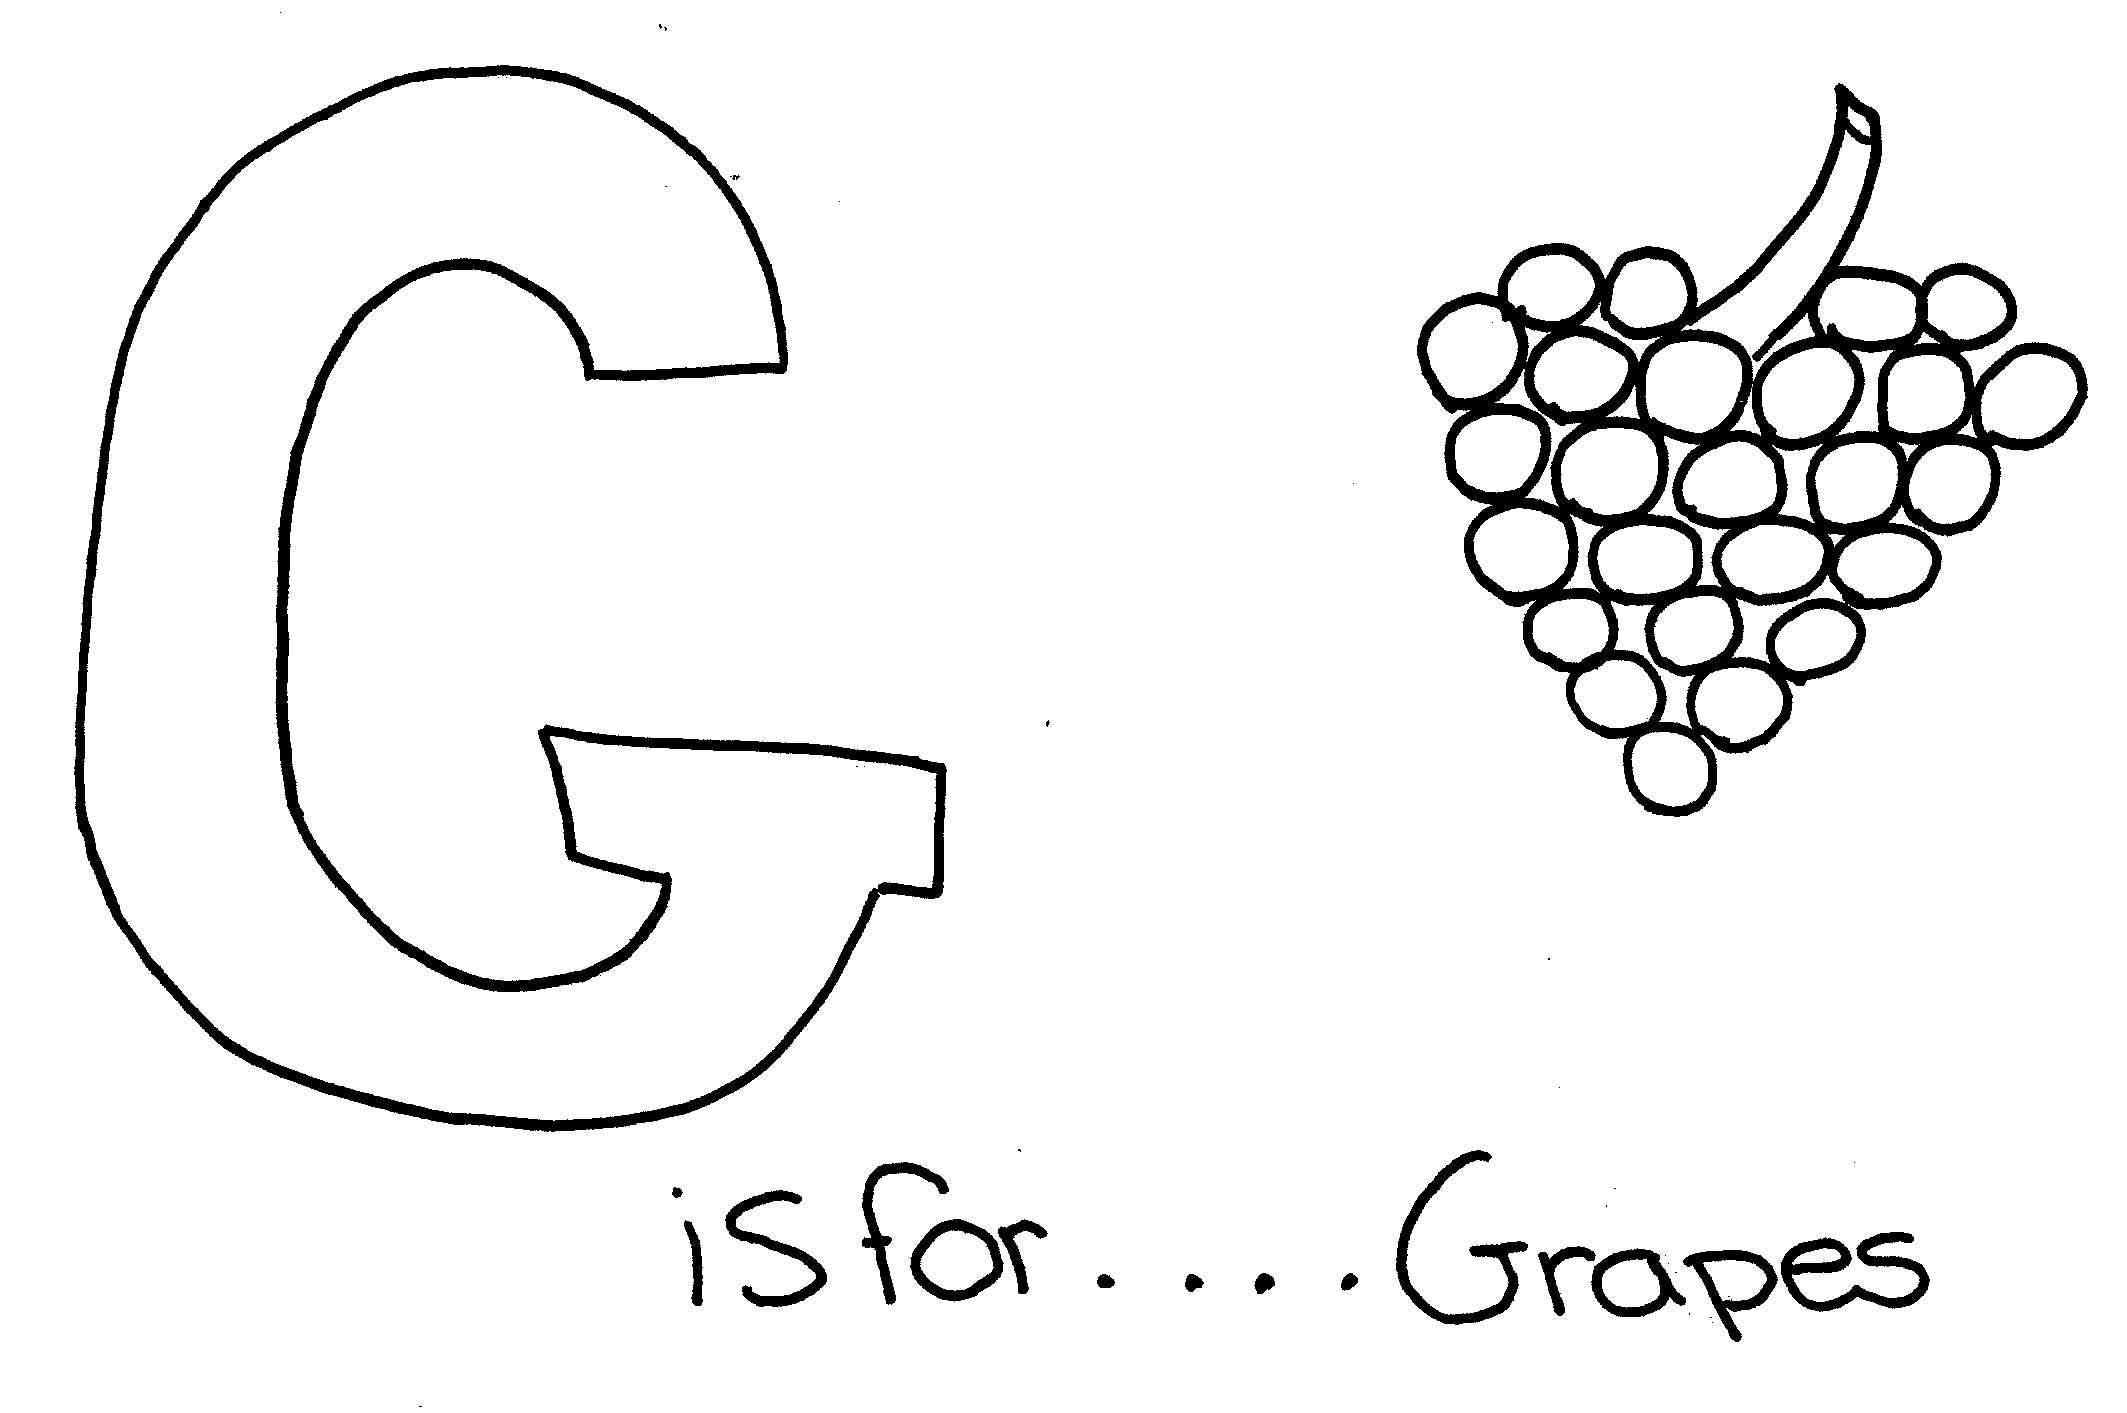 Free Printable Letter G Coloring Pages Nice - Coloring pages